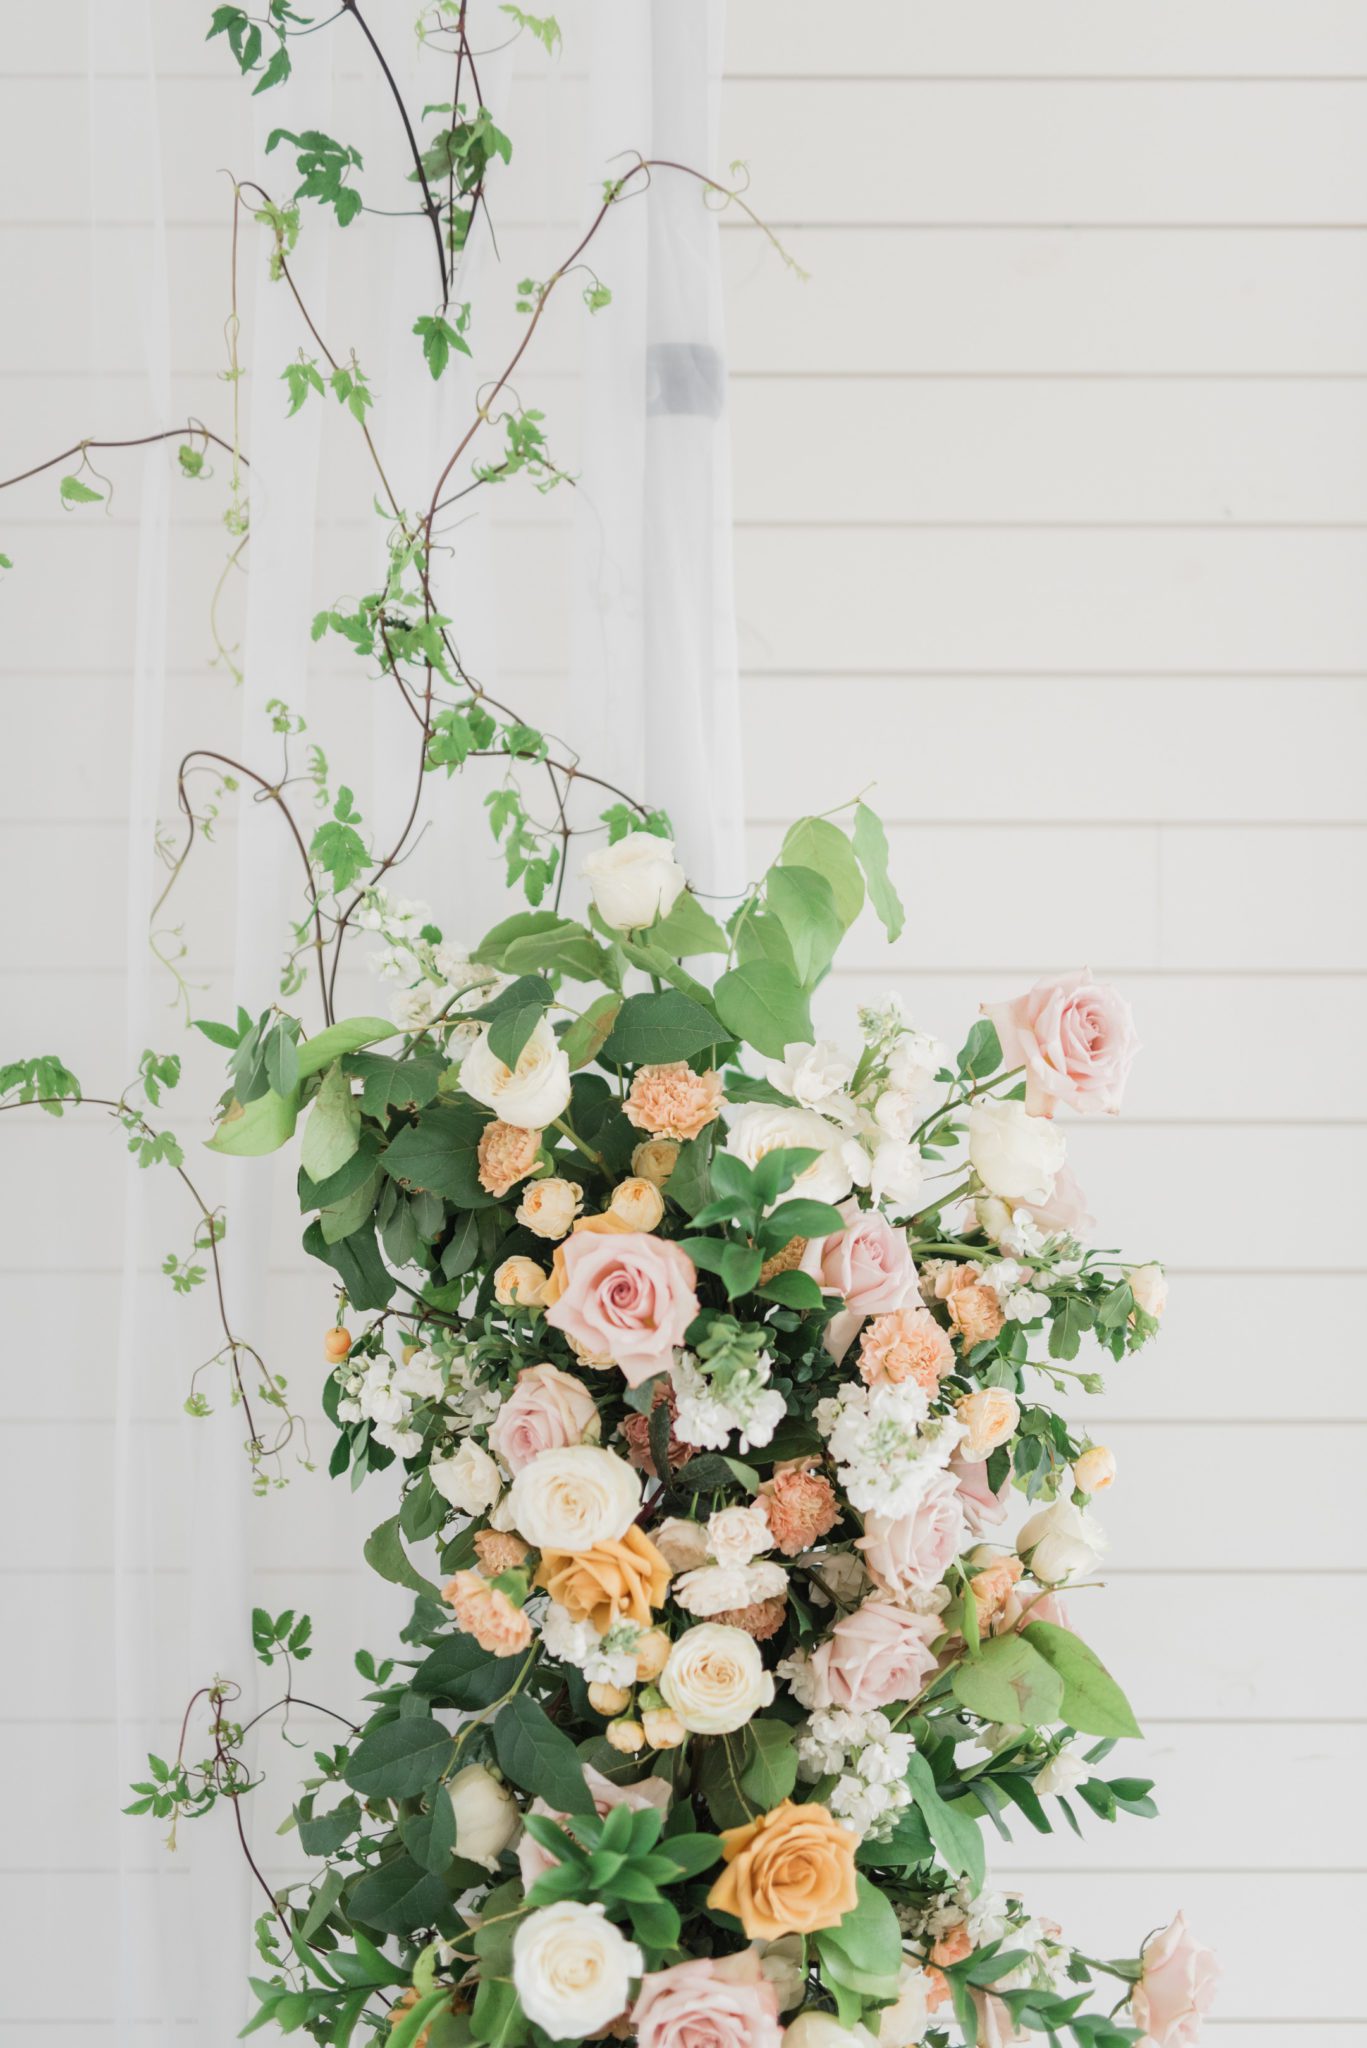 Romantic floral details for your wedding day